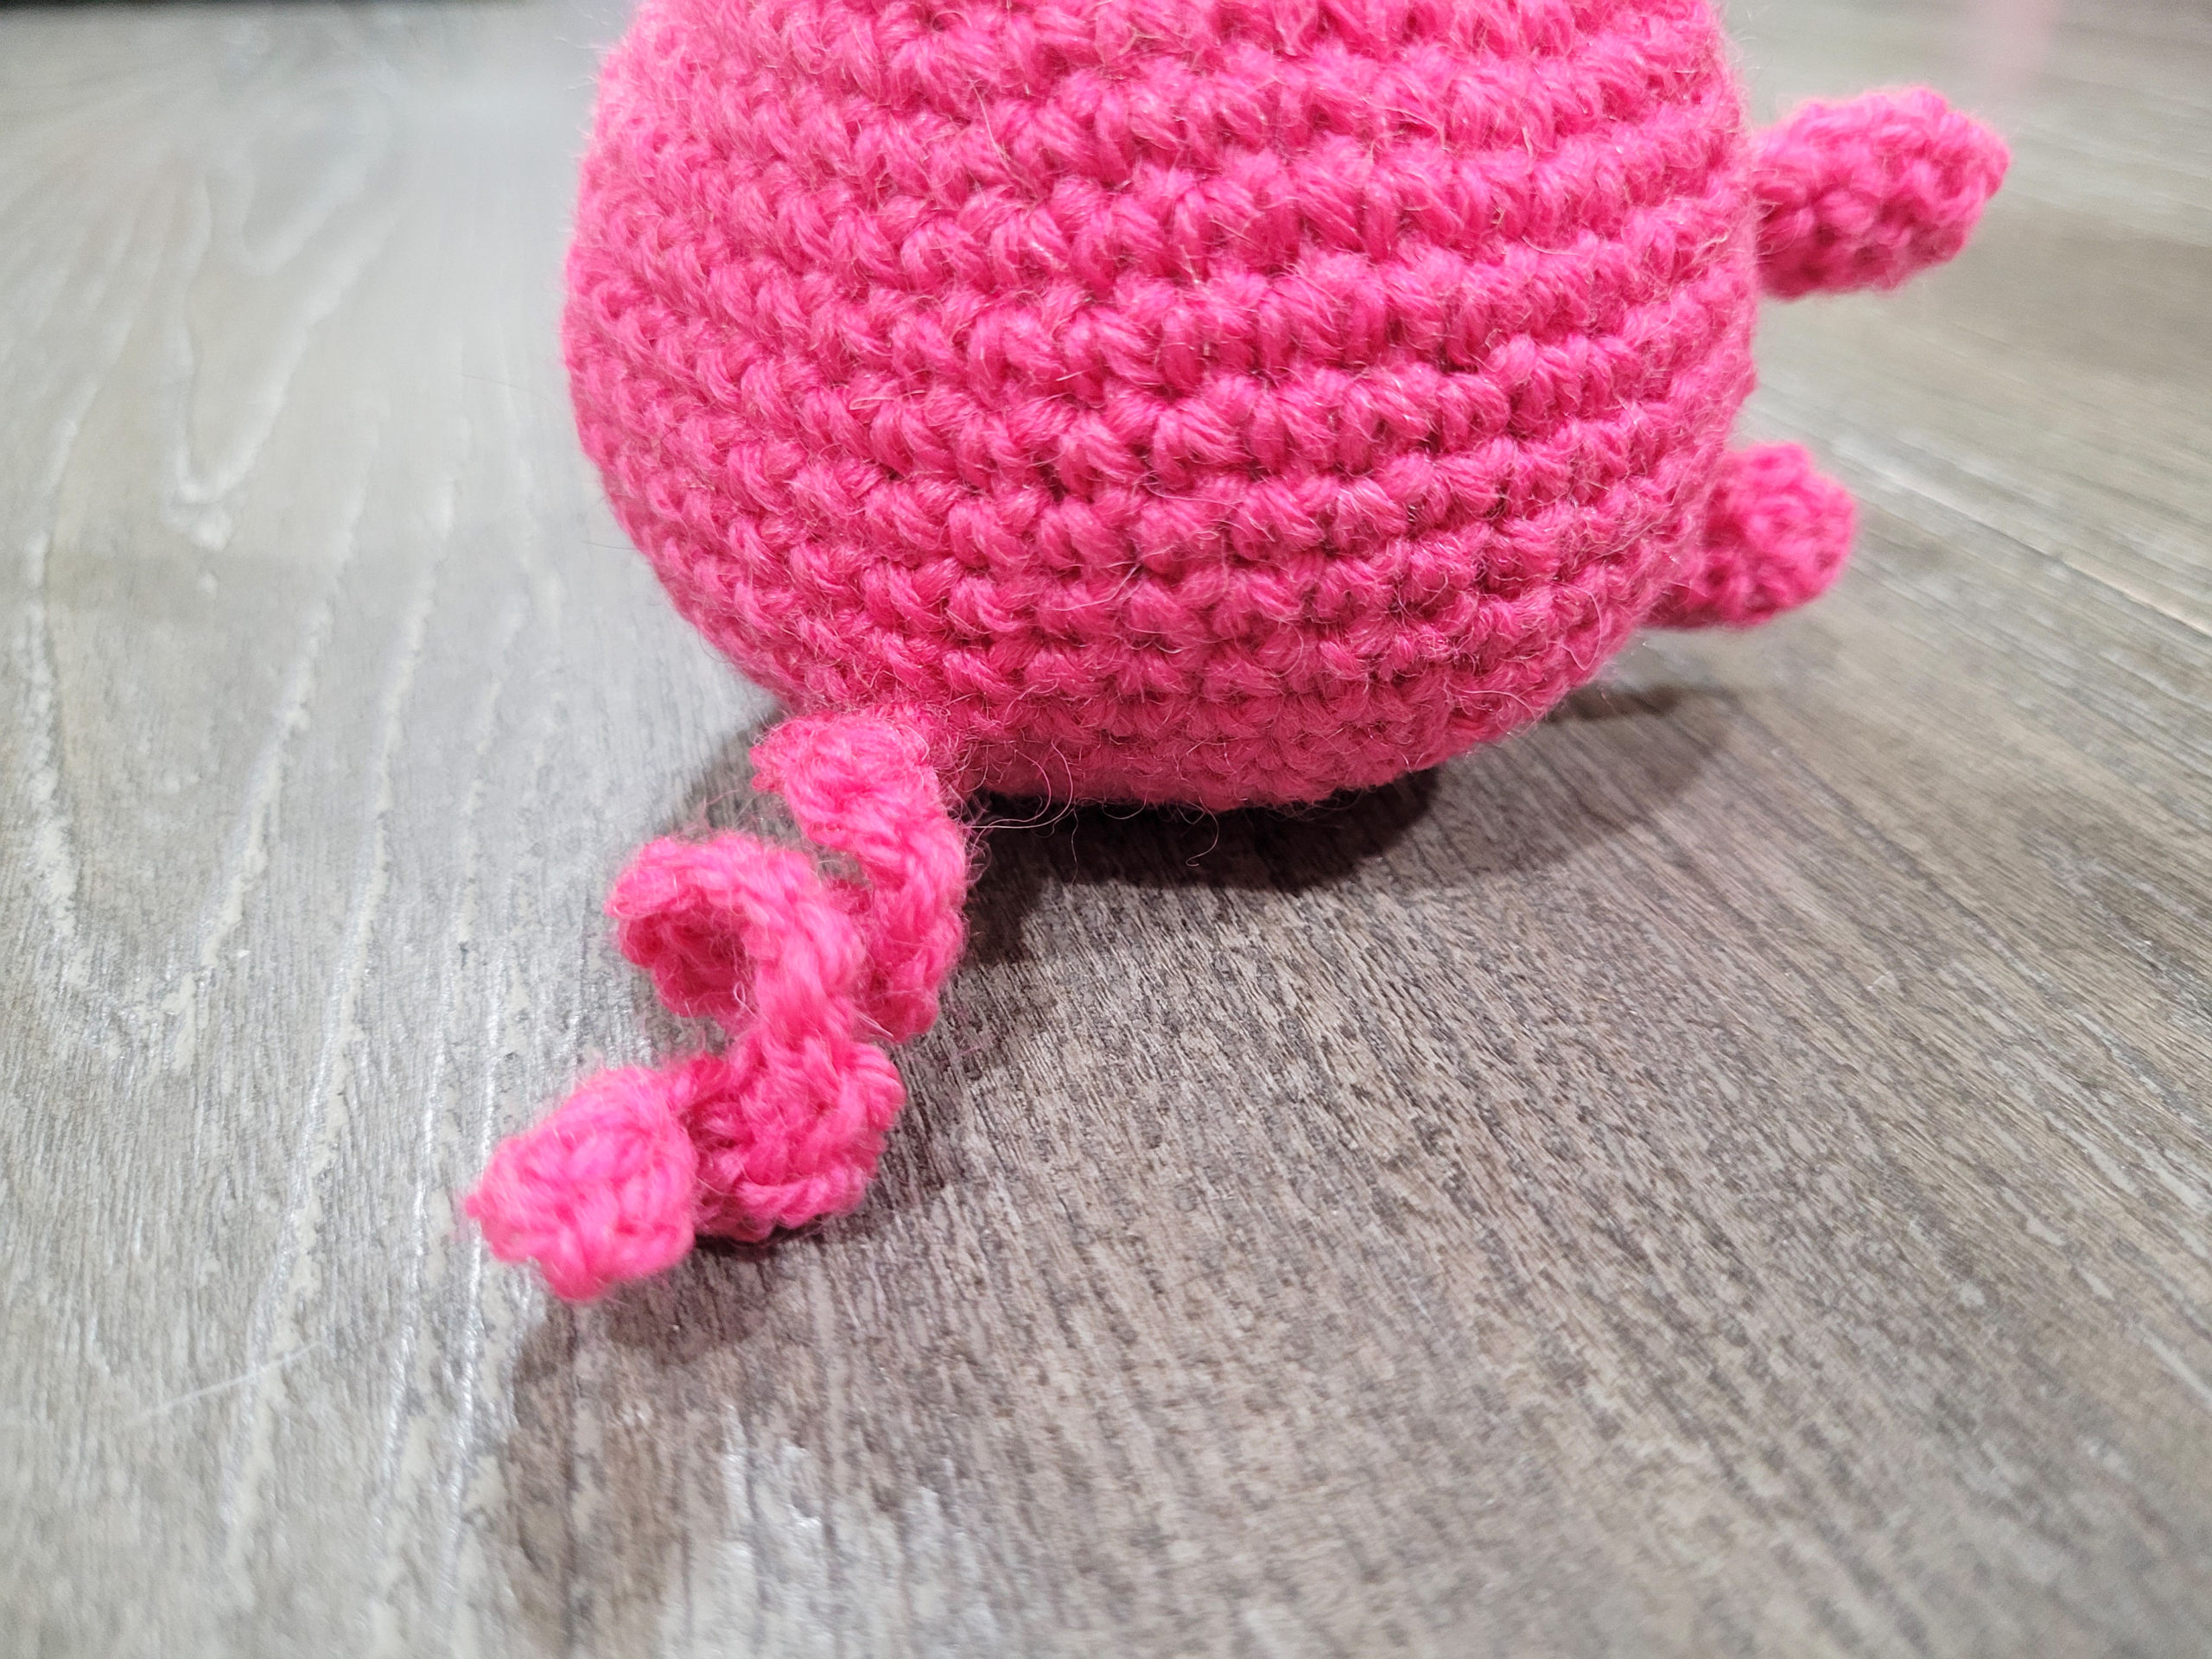 Create the perfect playtime pal with this sweet crochet roly polly piggy pattern. A lovely cuddle buddy, farmyard addition, or decor item, the Roly Polly Piggy is a cute stuffed toy with a friendly face